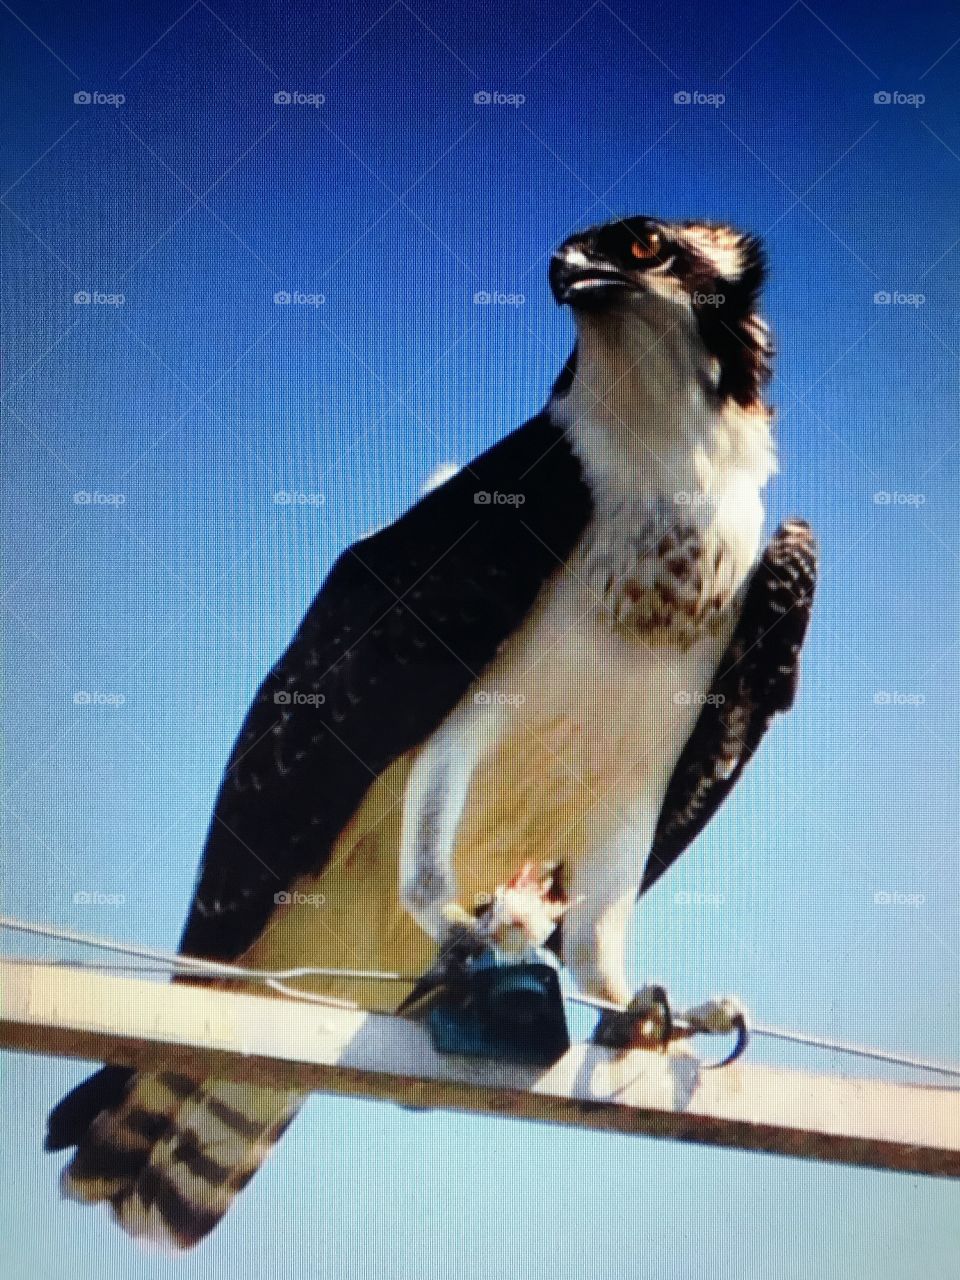 Osprey on the lookout 